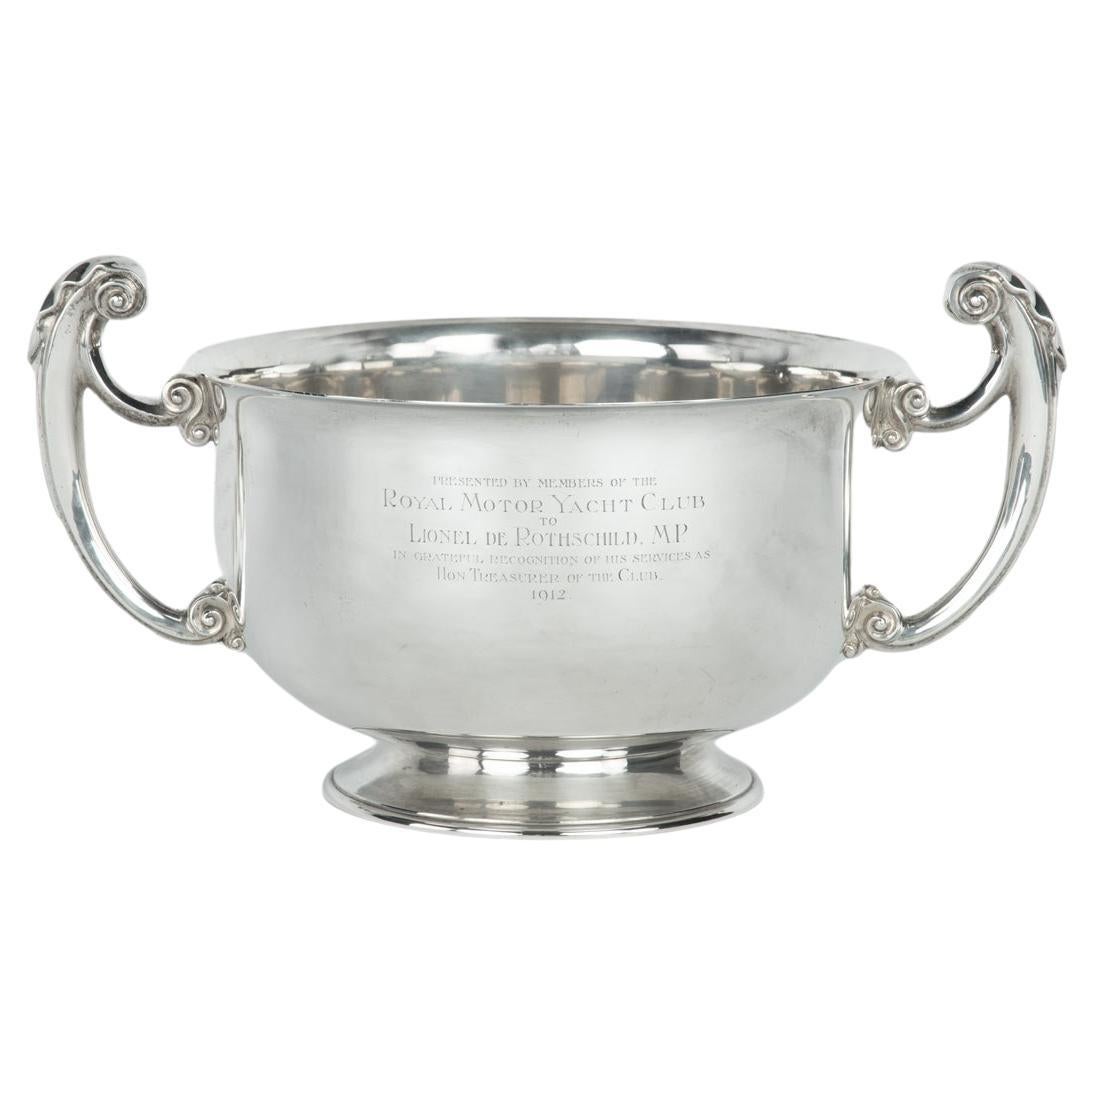 The 'Entente Cordial' silver champagne cooler for the British Motor Boat Club.